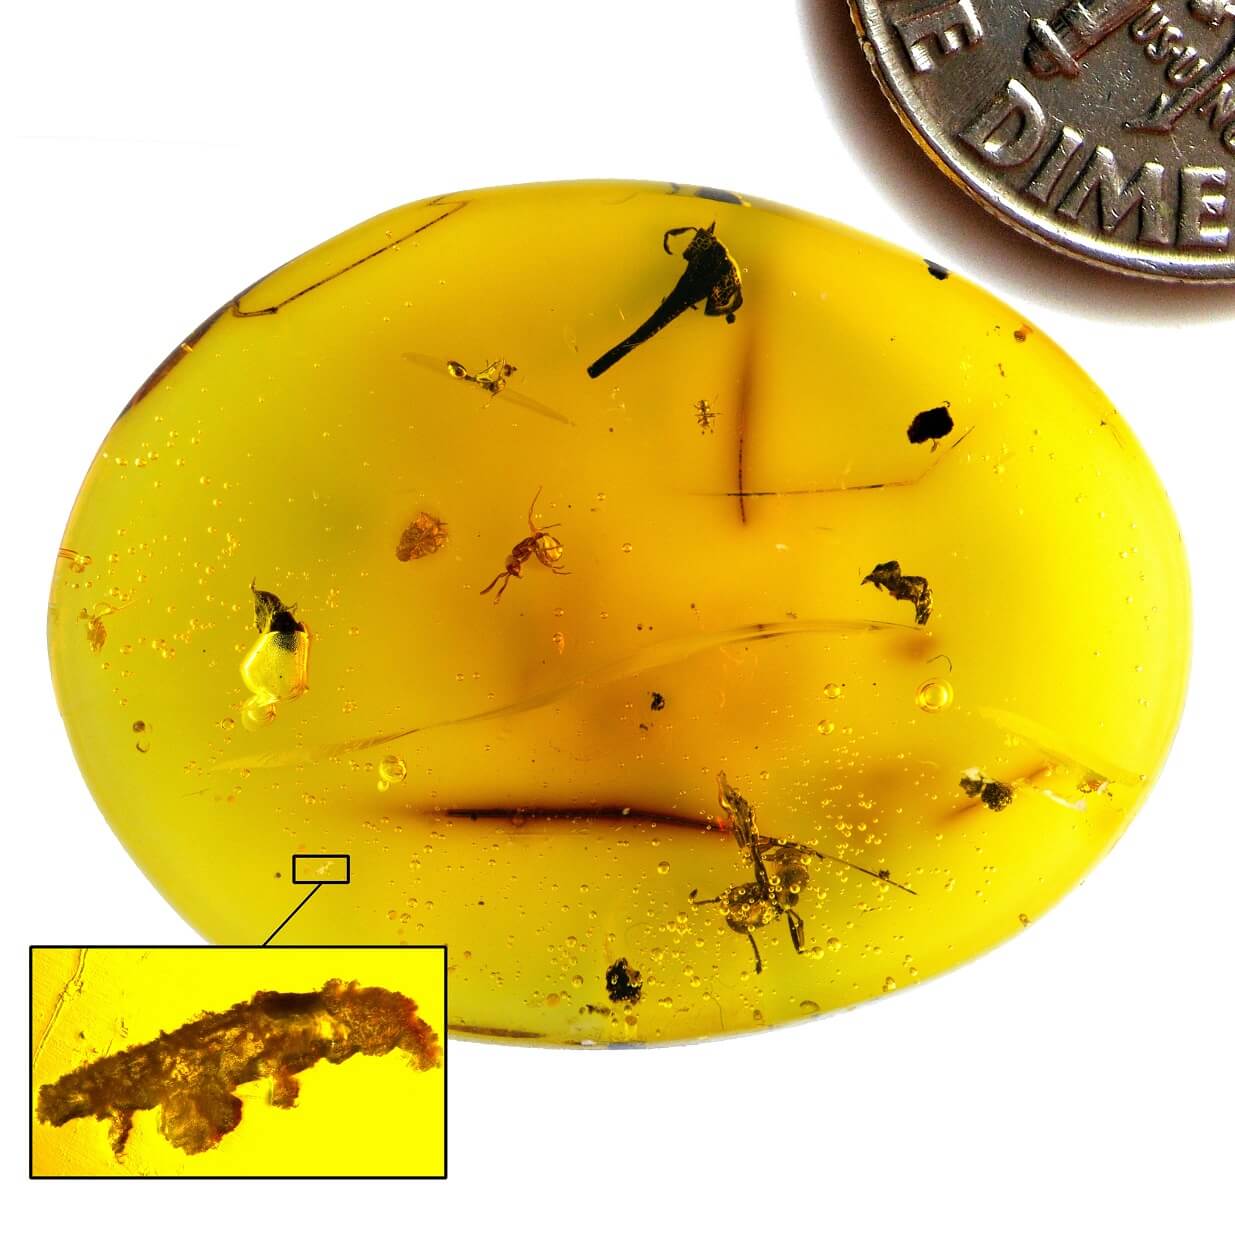 A big yellow oval with brown and black depris inside. One spotis magnified and there is a squased oblong inside it